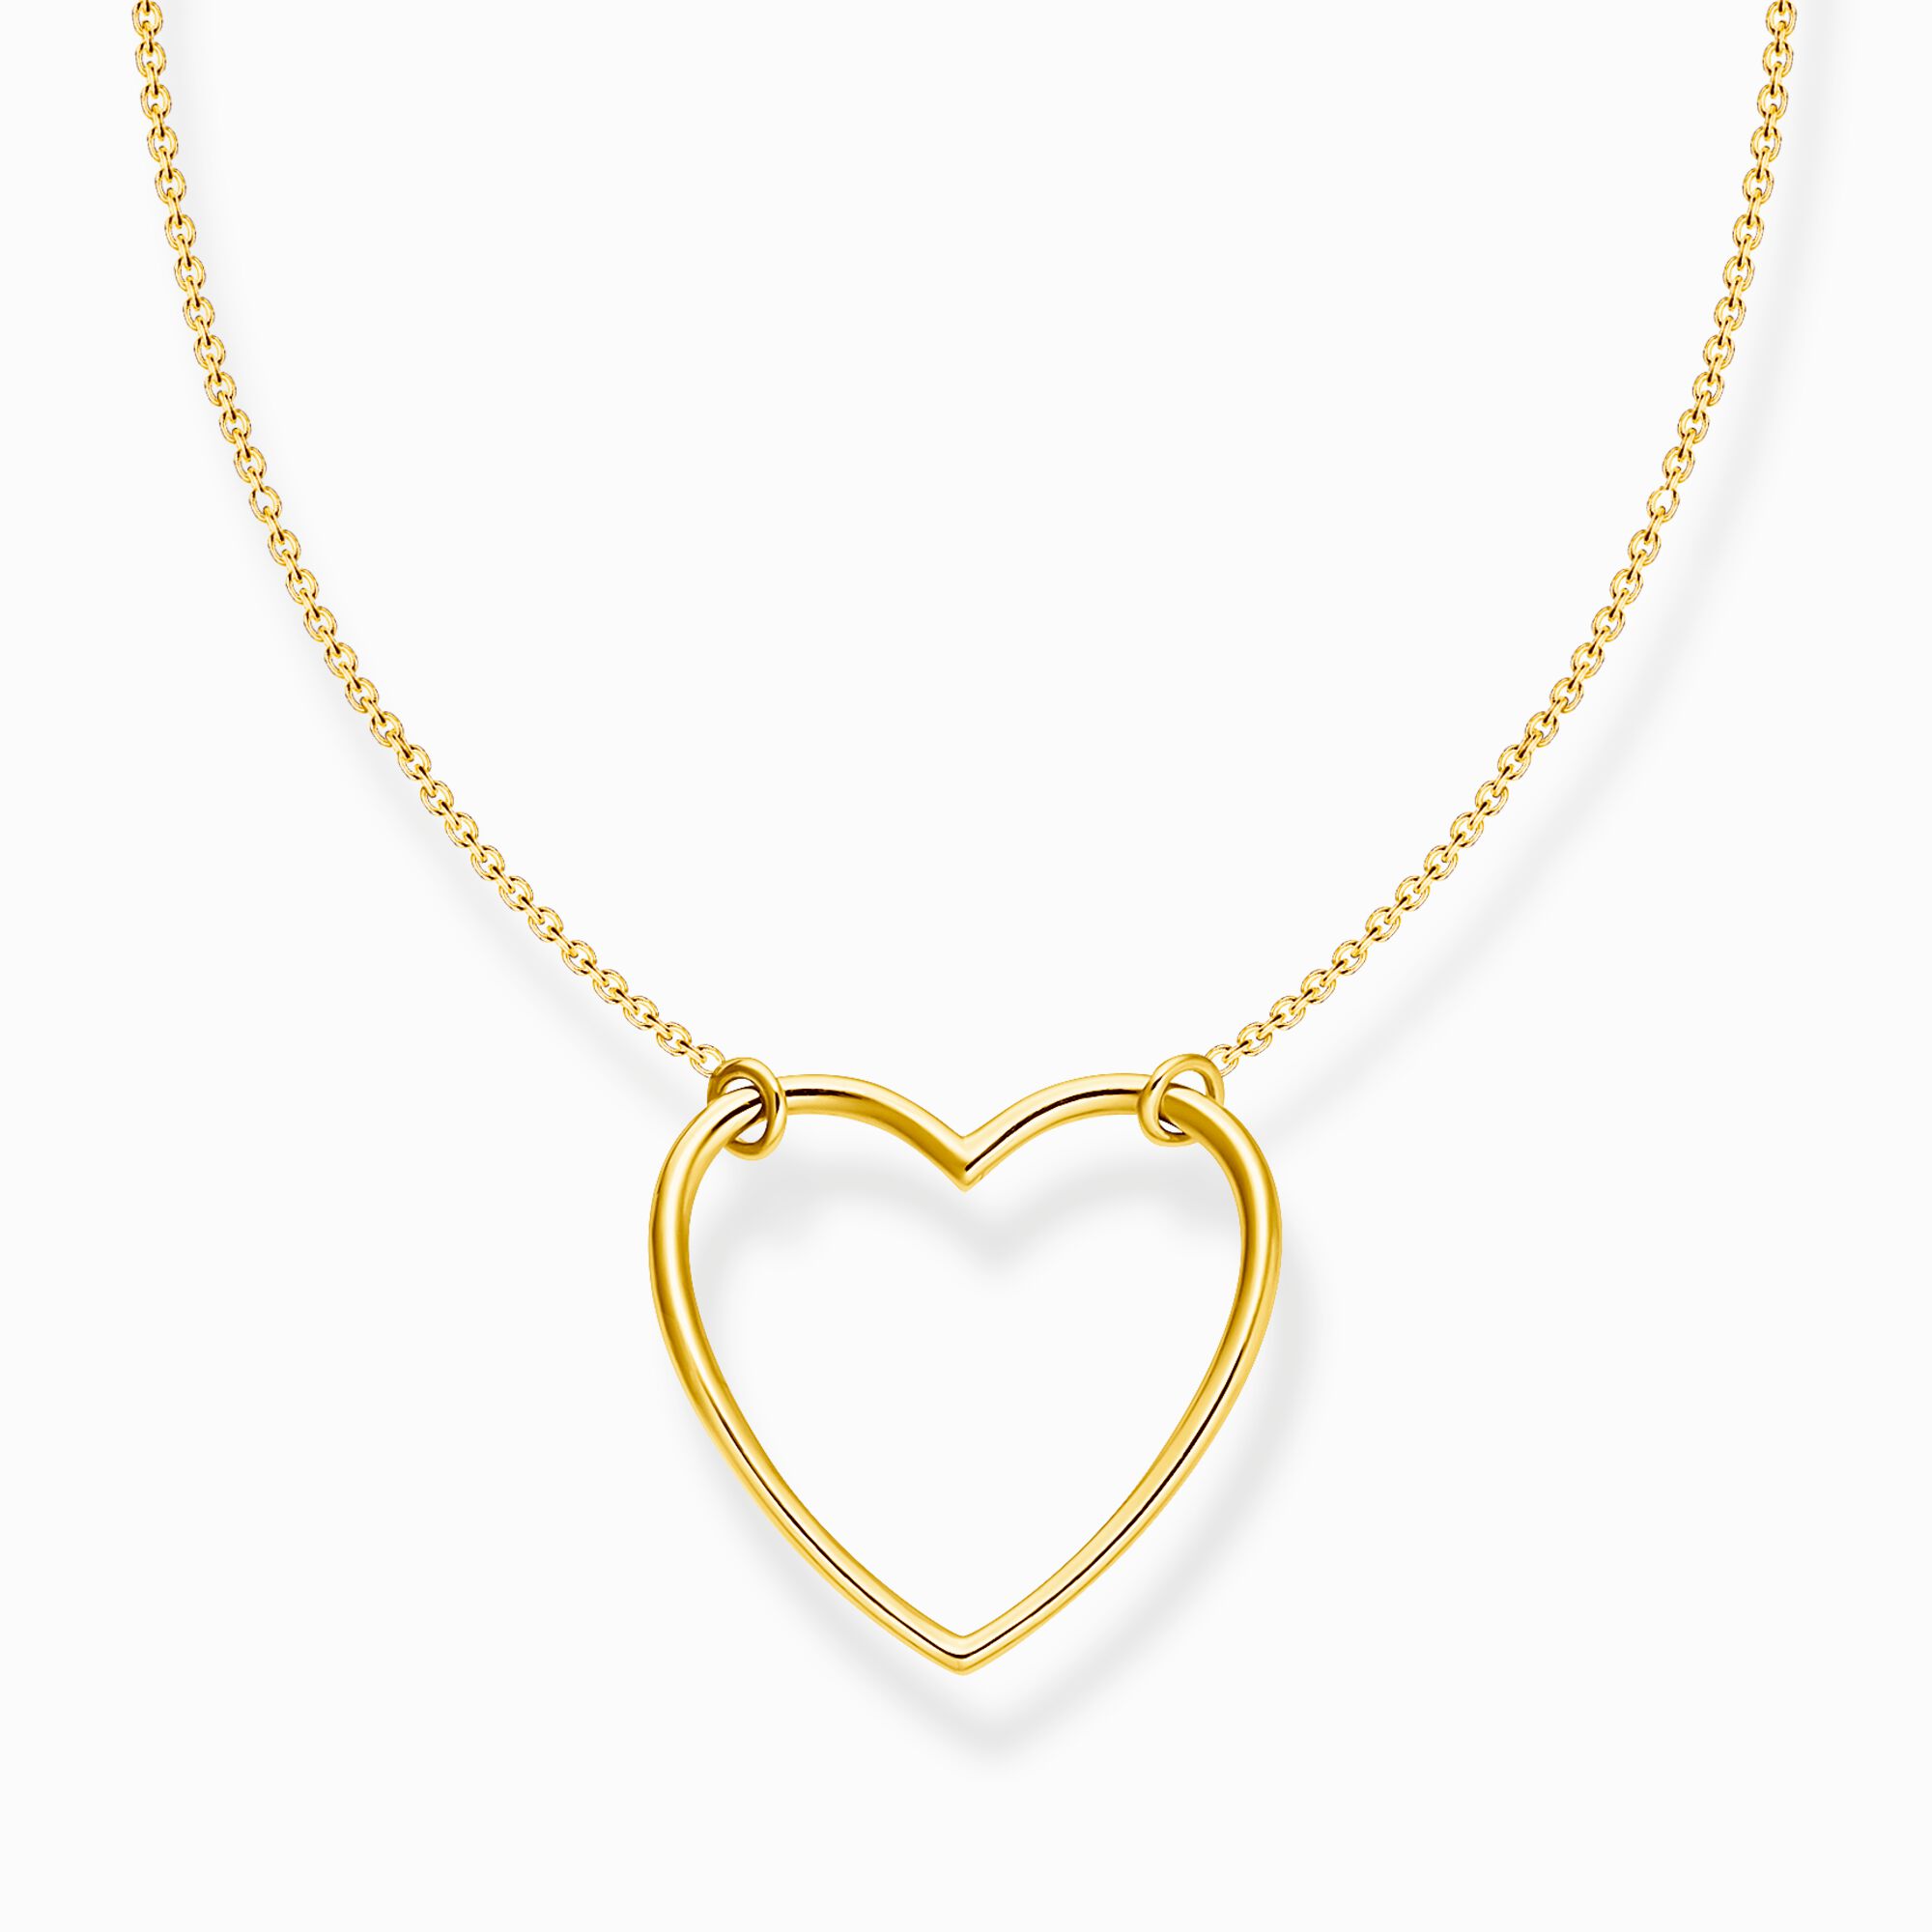 Necklace heart gold from the Charming Collection collection in the THOMAS SABO online store